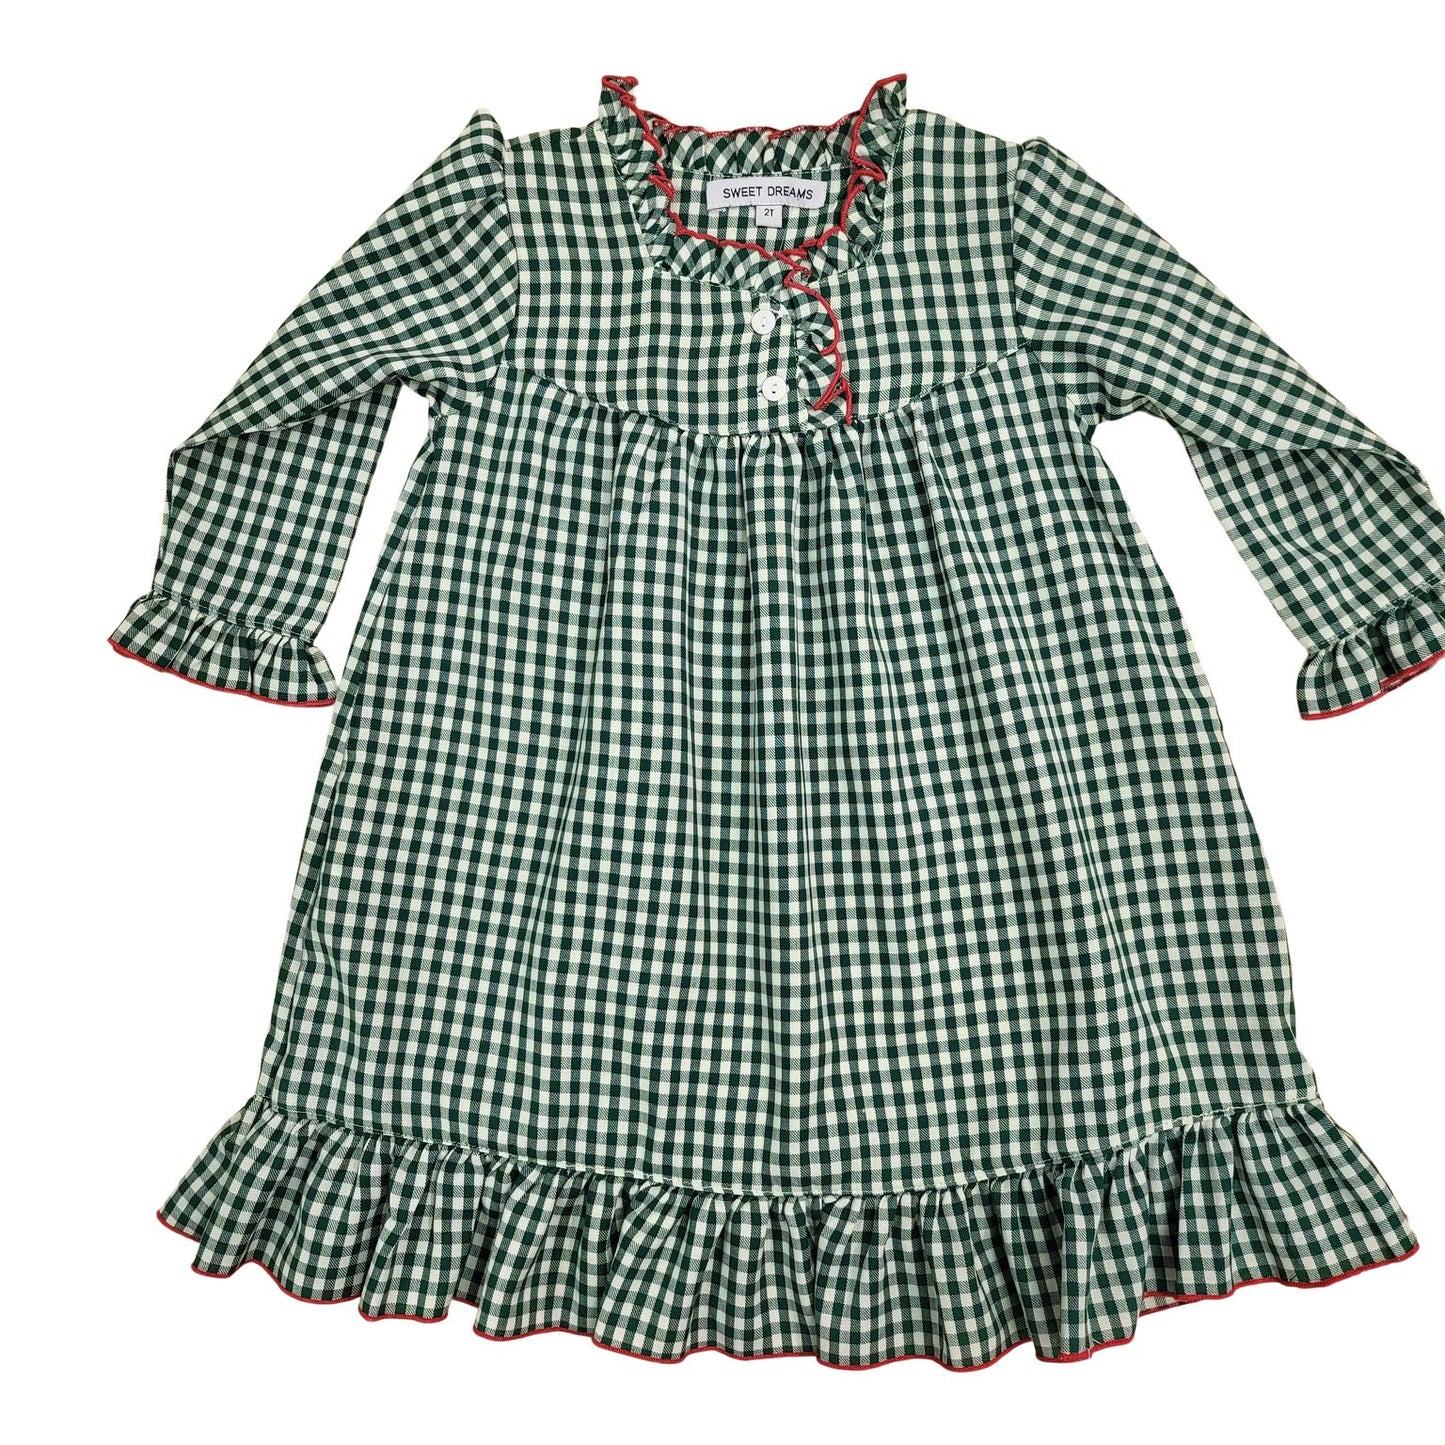 Green Gingham Gown